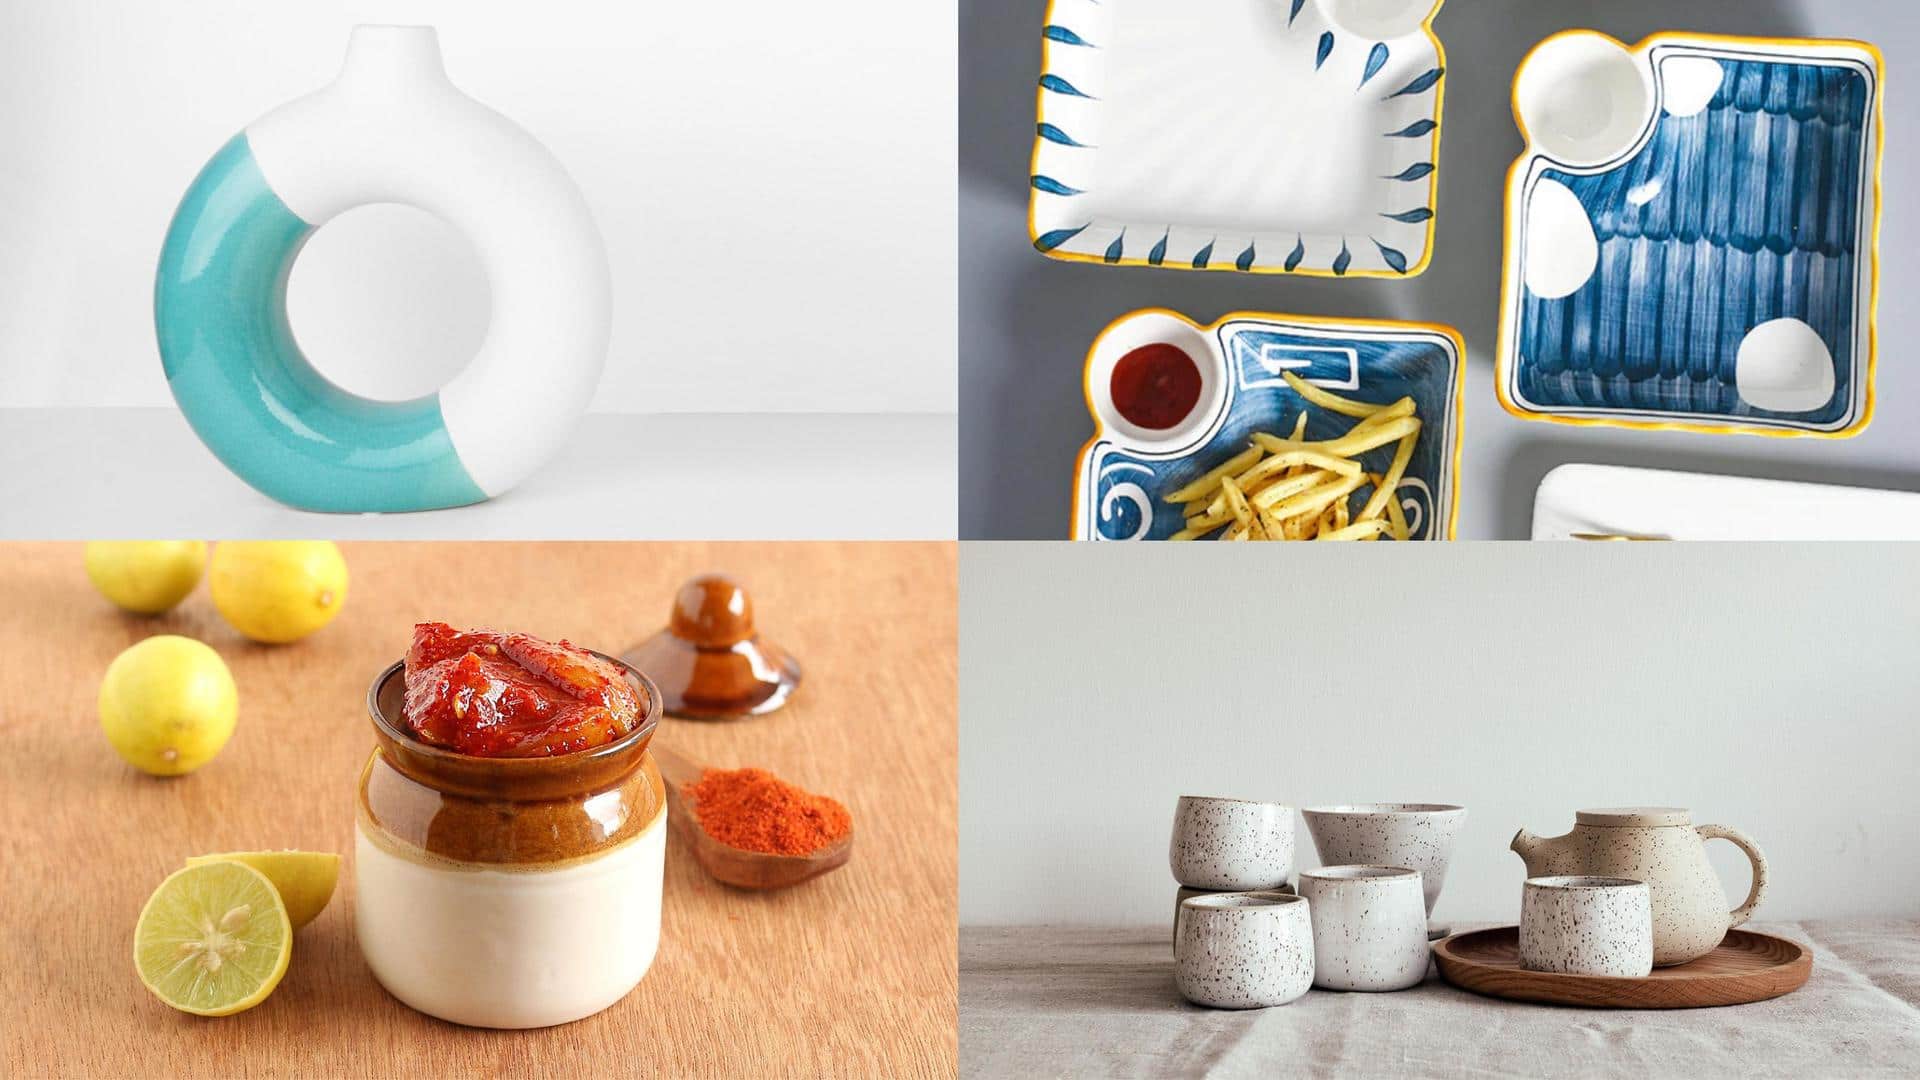 Elevate your home decor with these ceramic items